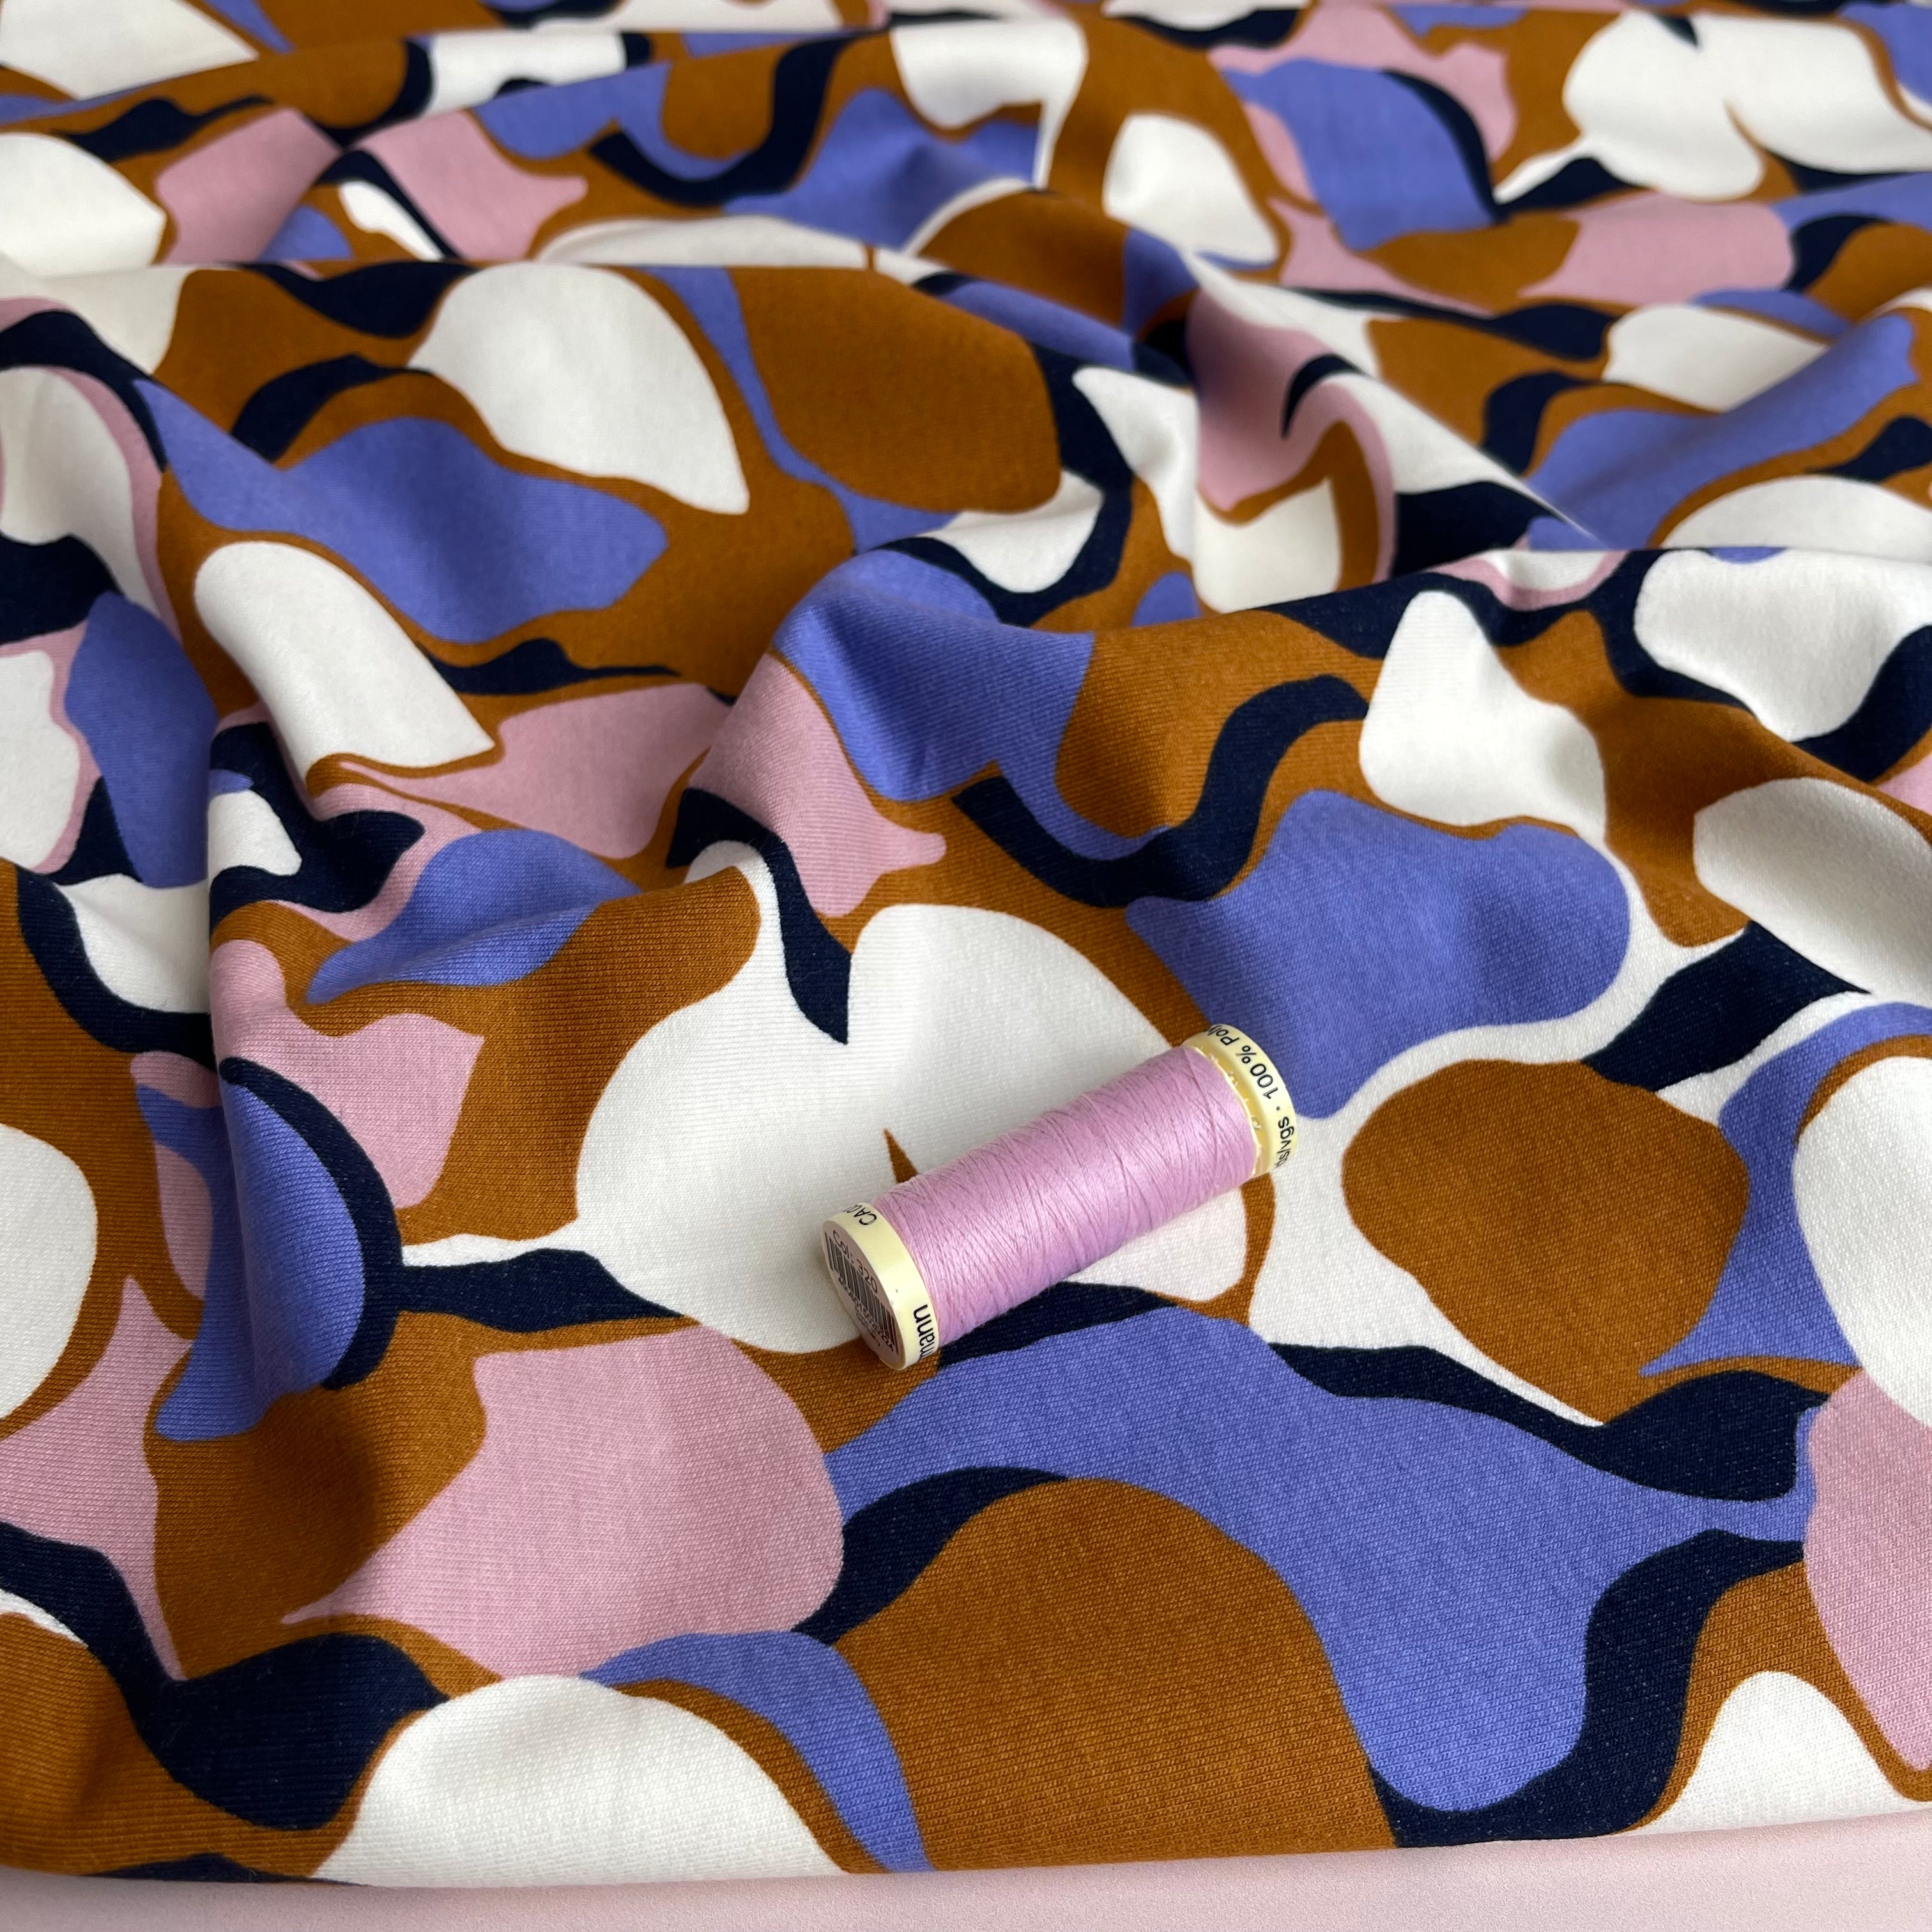 Abstract Shapes Lavender Peach Soft Cotton Sweat-shirting Fabric